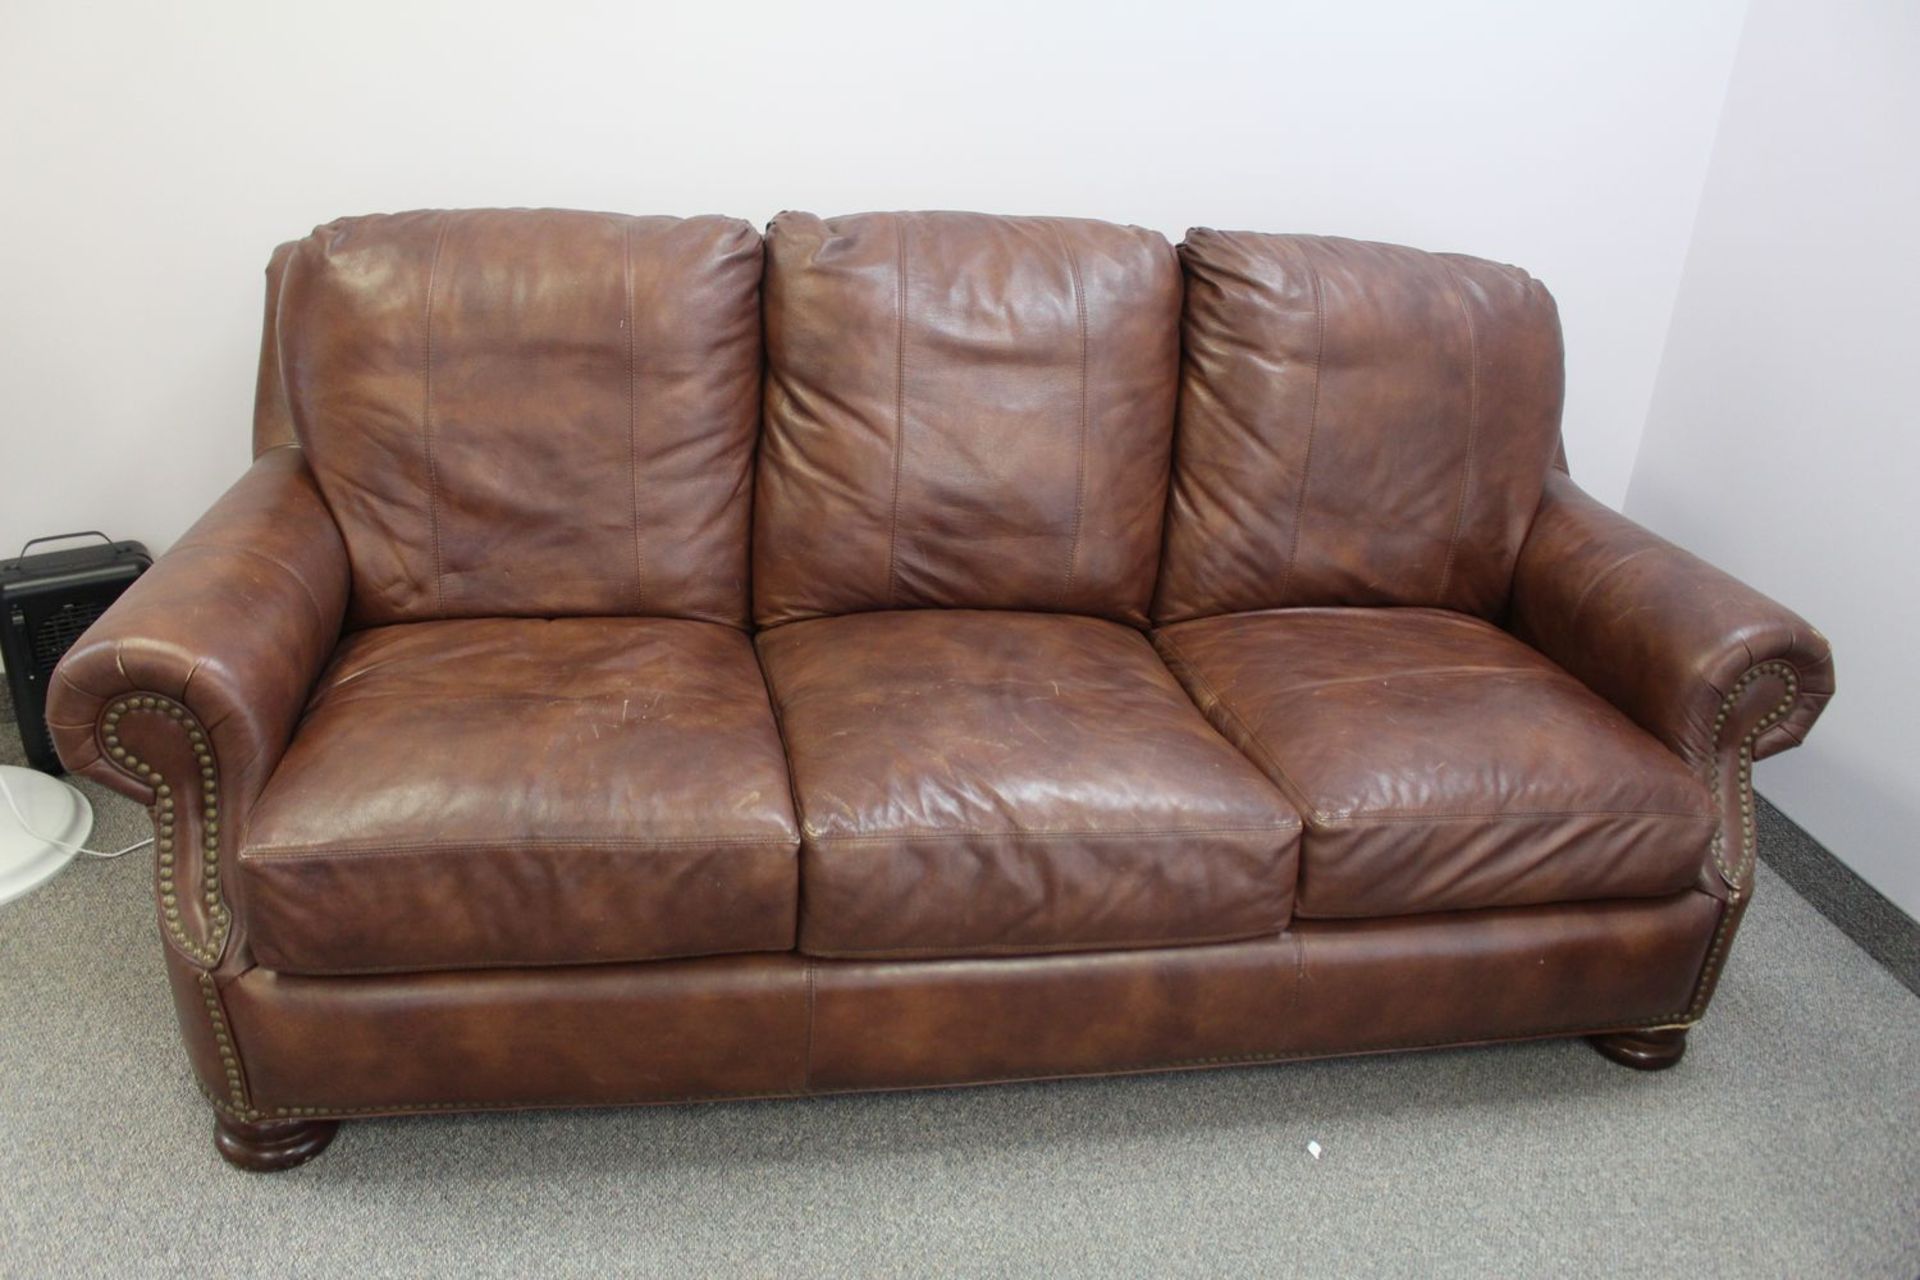 BROWN LEATHER 3-SEAT SOFA W/ STUDS - 88"L X 45"D X 36"H (LOCATED AT: NIAGARA ON-THE-LAKE, ONTARIO